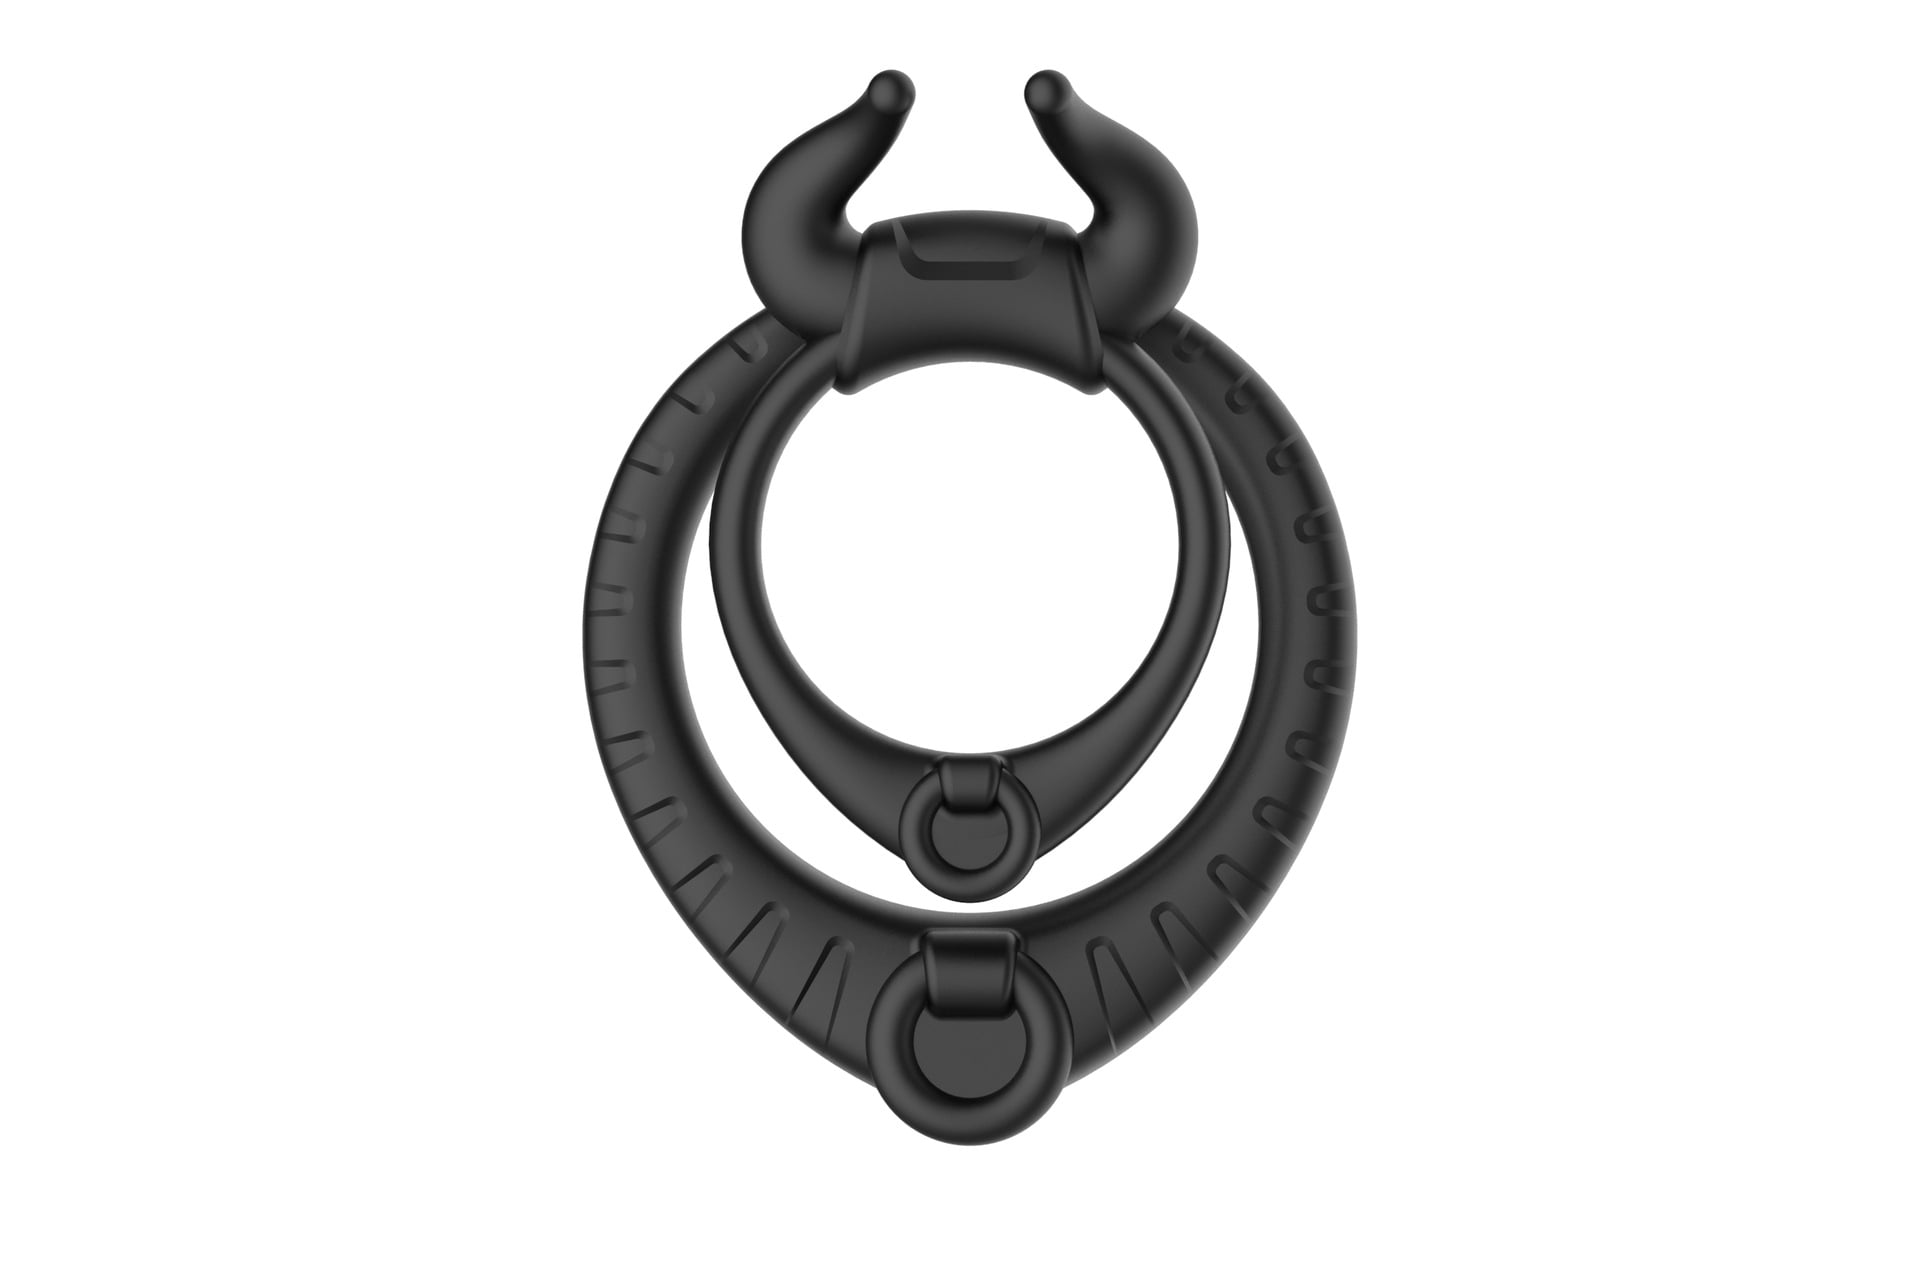 Cock Ring - Super Silicone Penis Ring